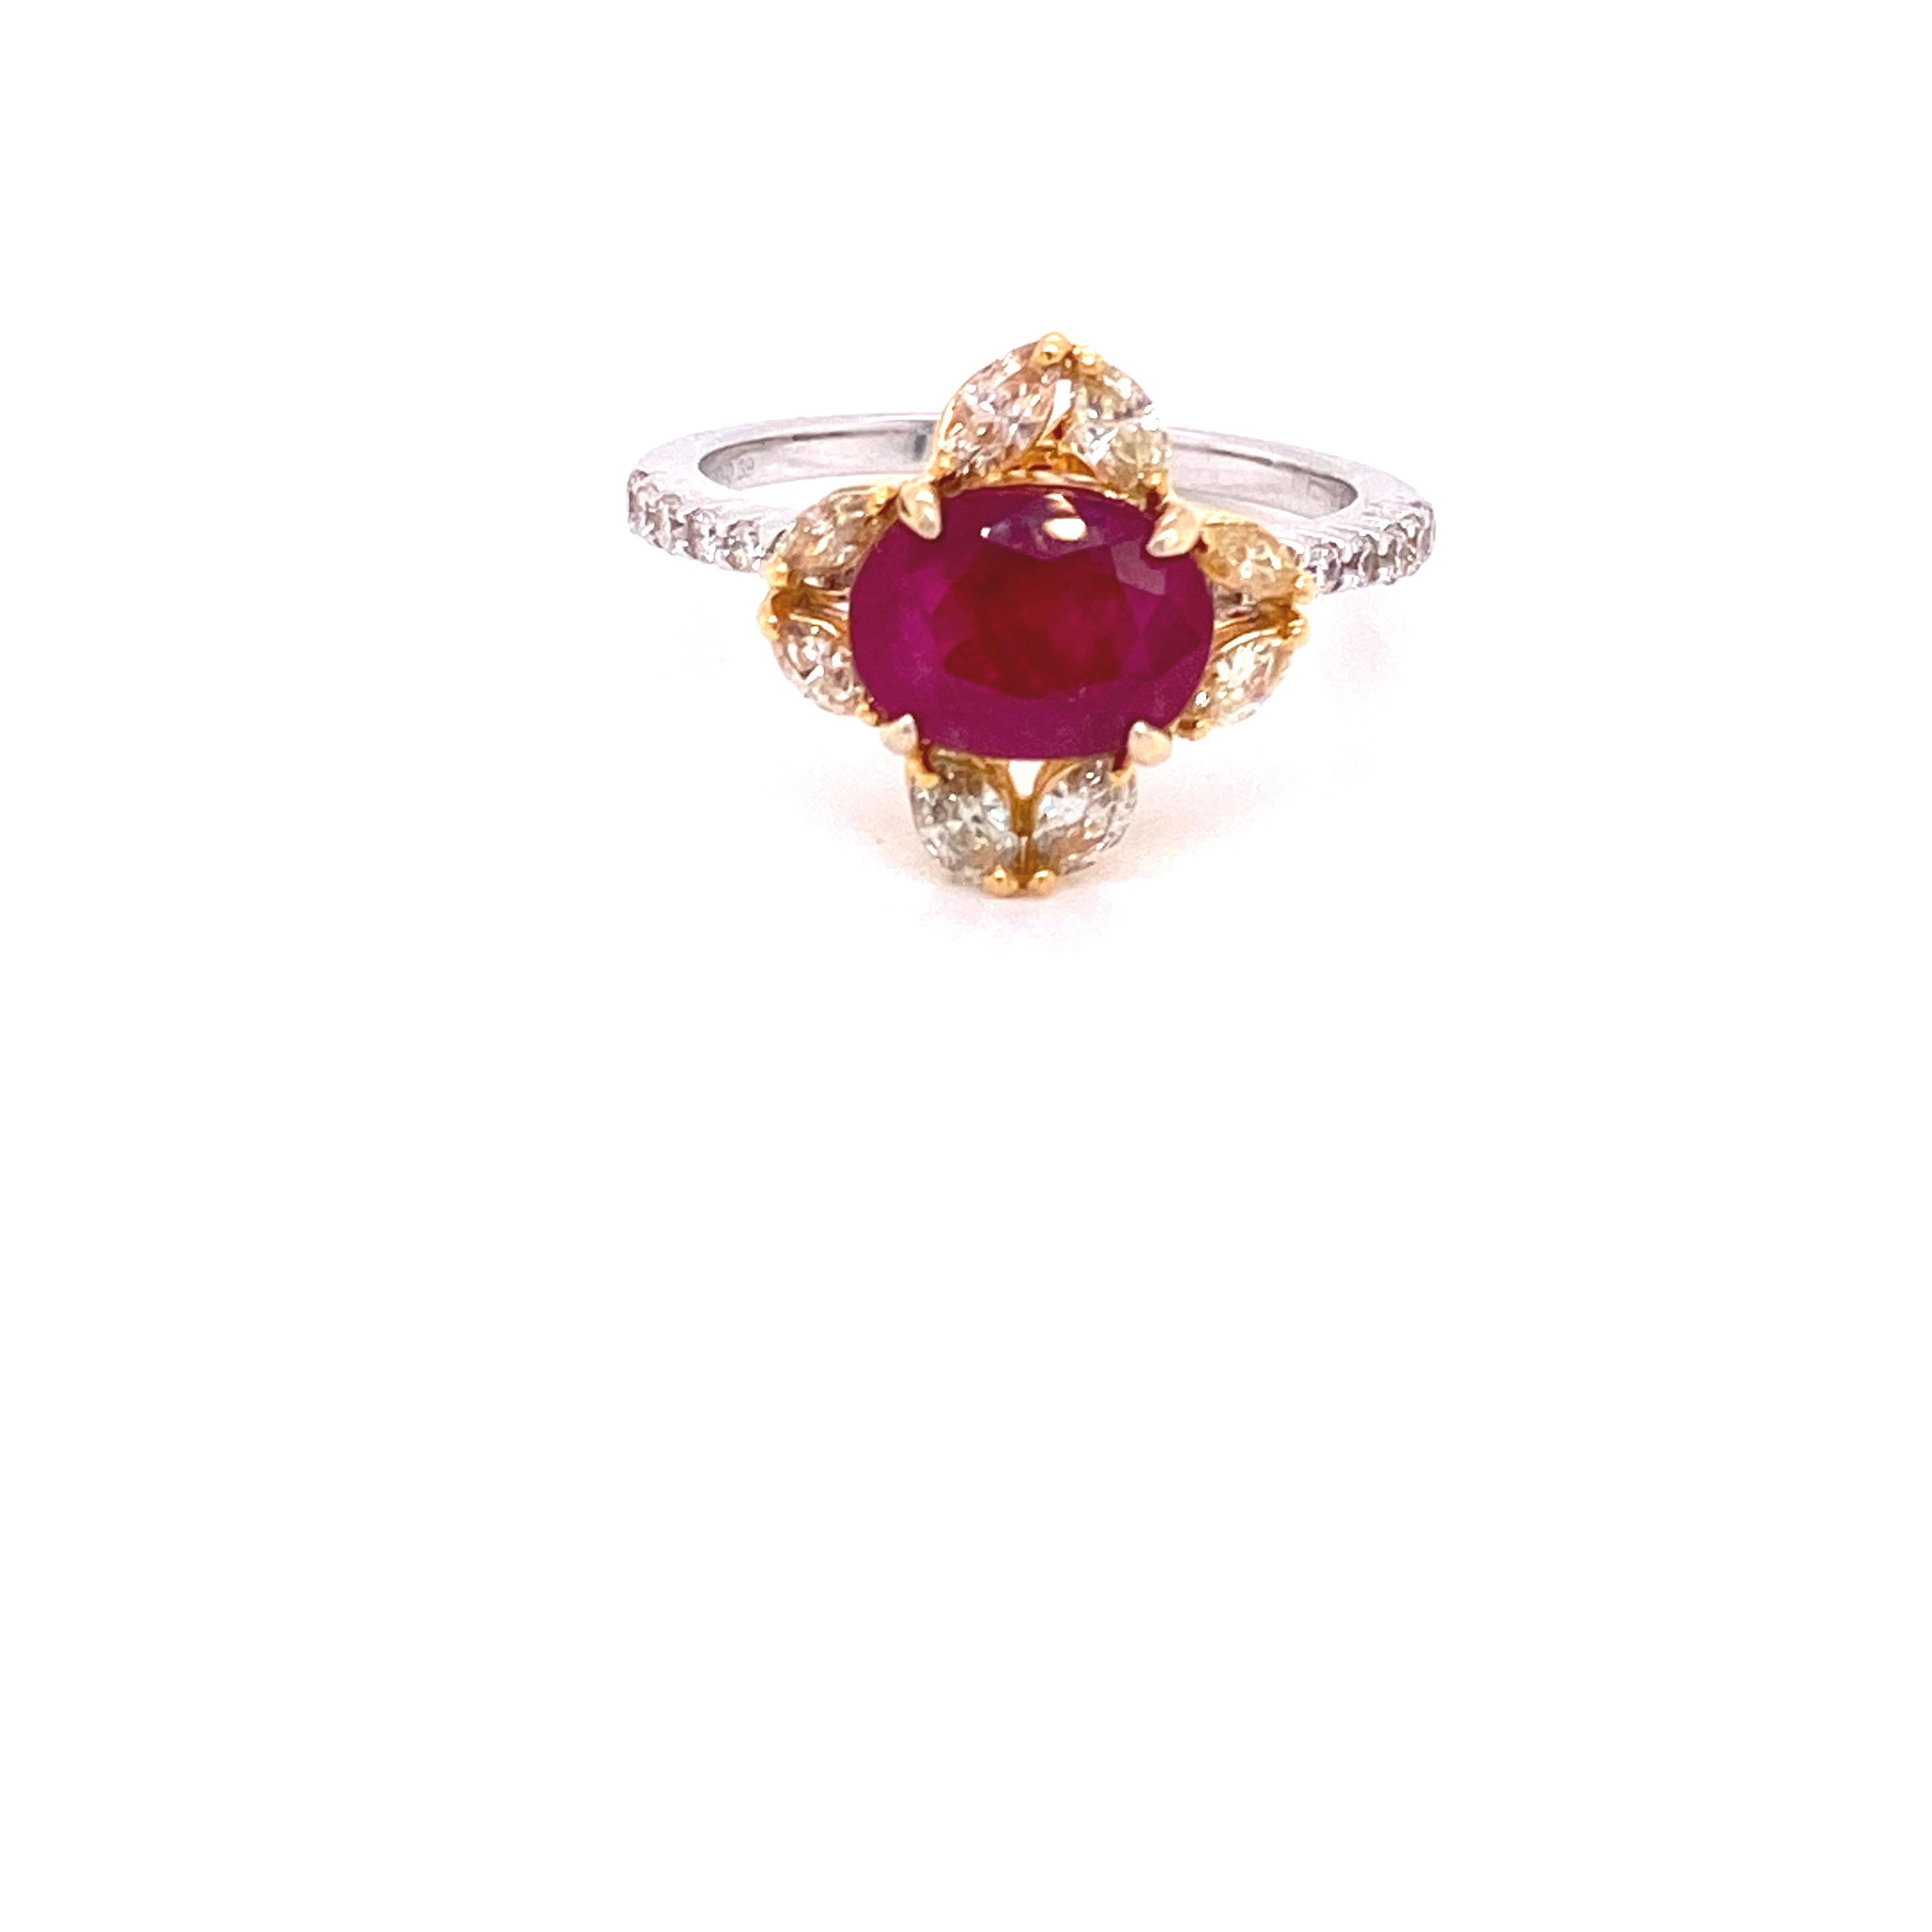 2.61 Carat GRS Certified Unheated Burmese Ruby and Diamond Gold Engagement Ring:

A beautiful ring, it features a gorgeous GRS certified oval-cut unheated Burmese ruby weighing 2.61 carat, surrounded by a flowery halo of fancy yellow marquise